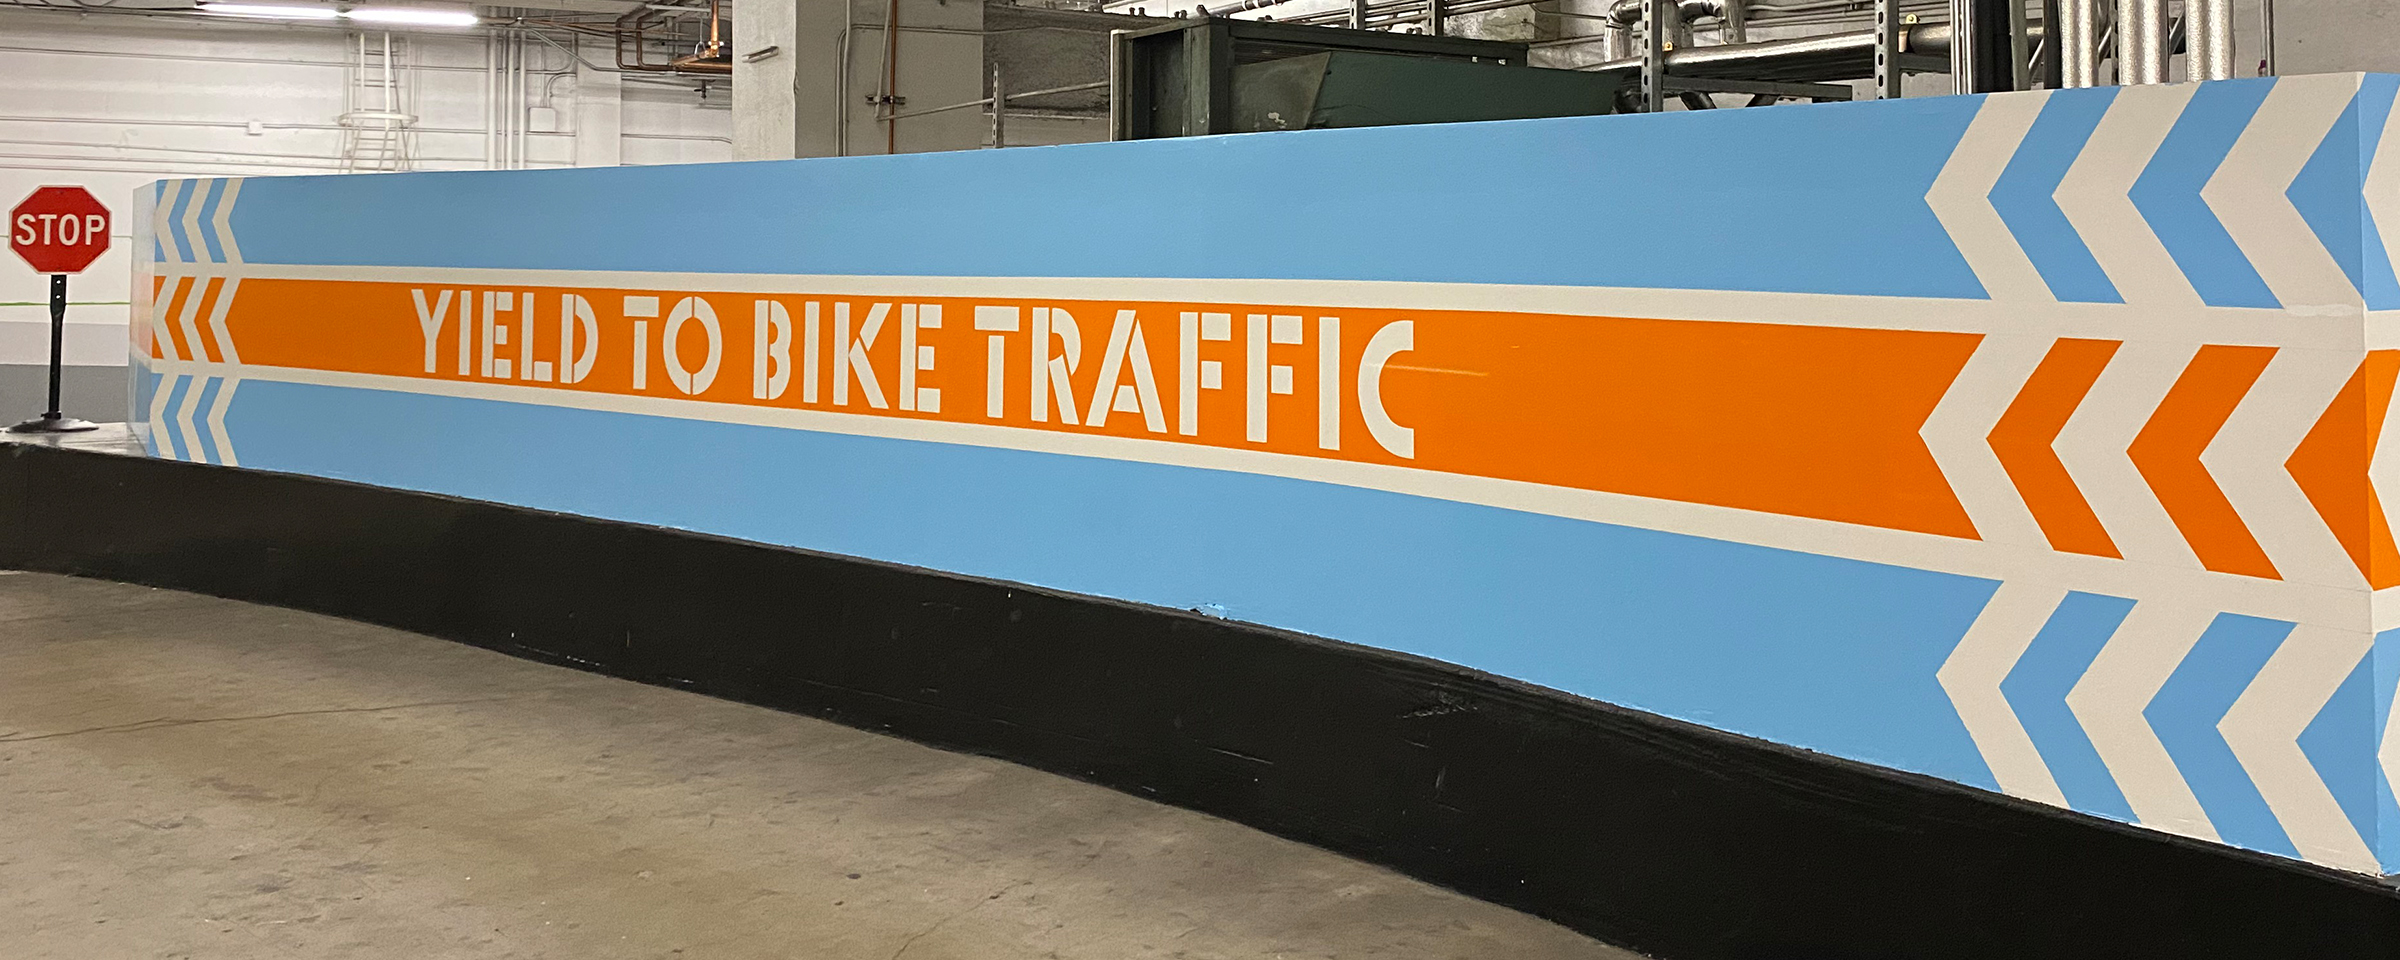 Epoxy Parking Structure Graphics Yield to Bike Traffic